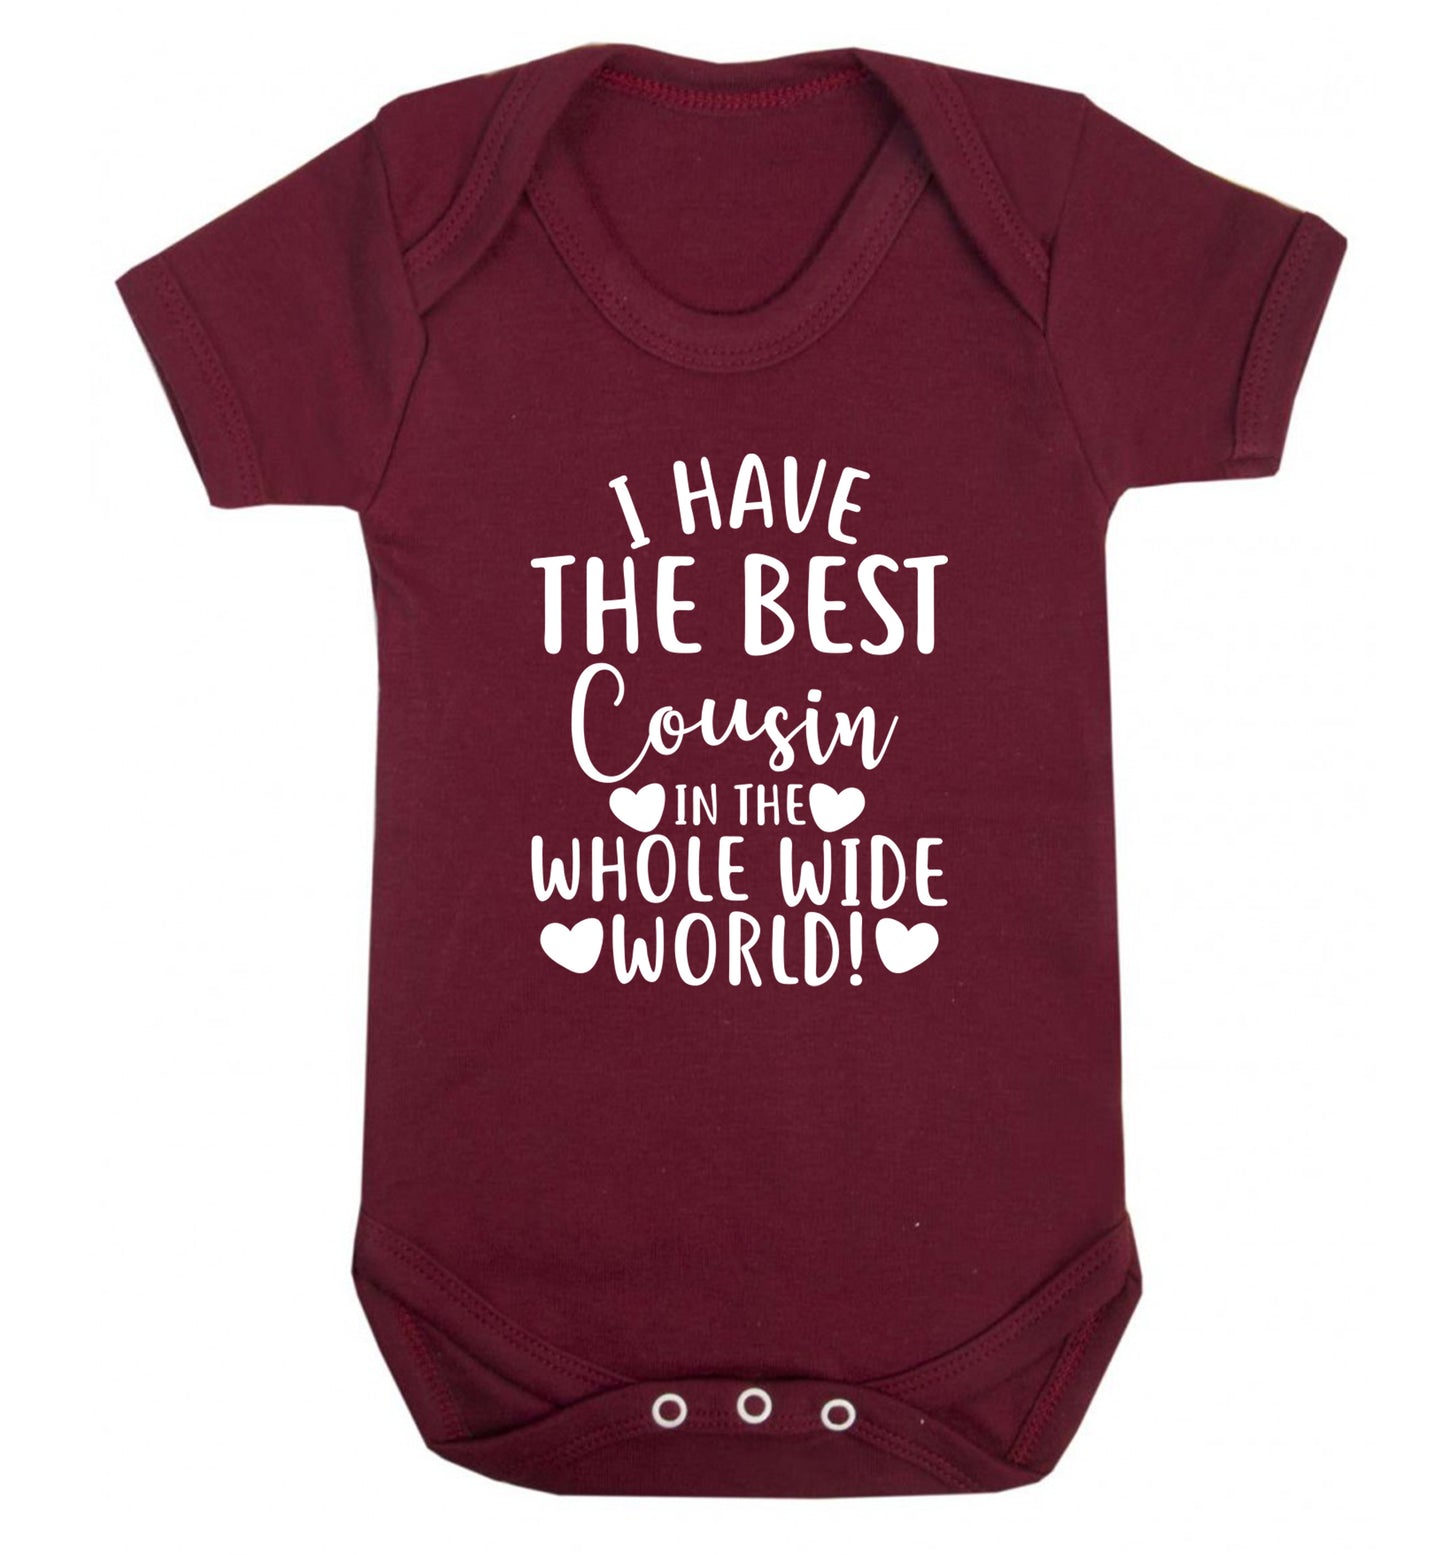 I have the best cousin in the whole wide world! Baby Vest maroon 18-24 months